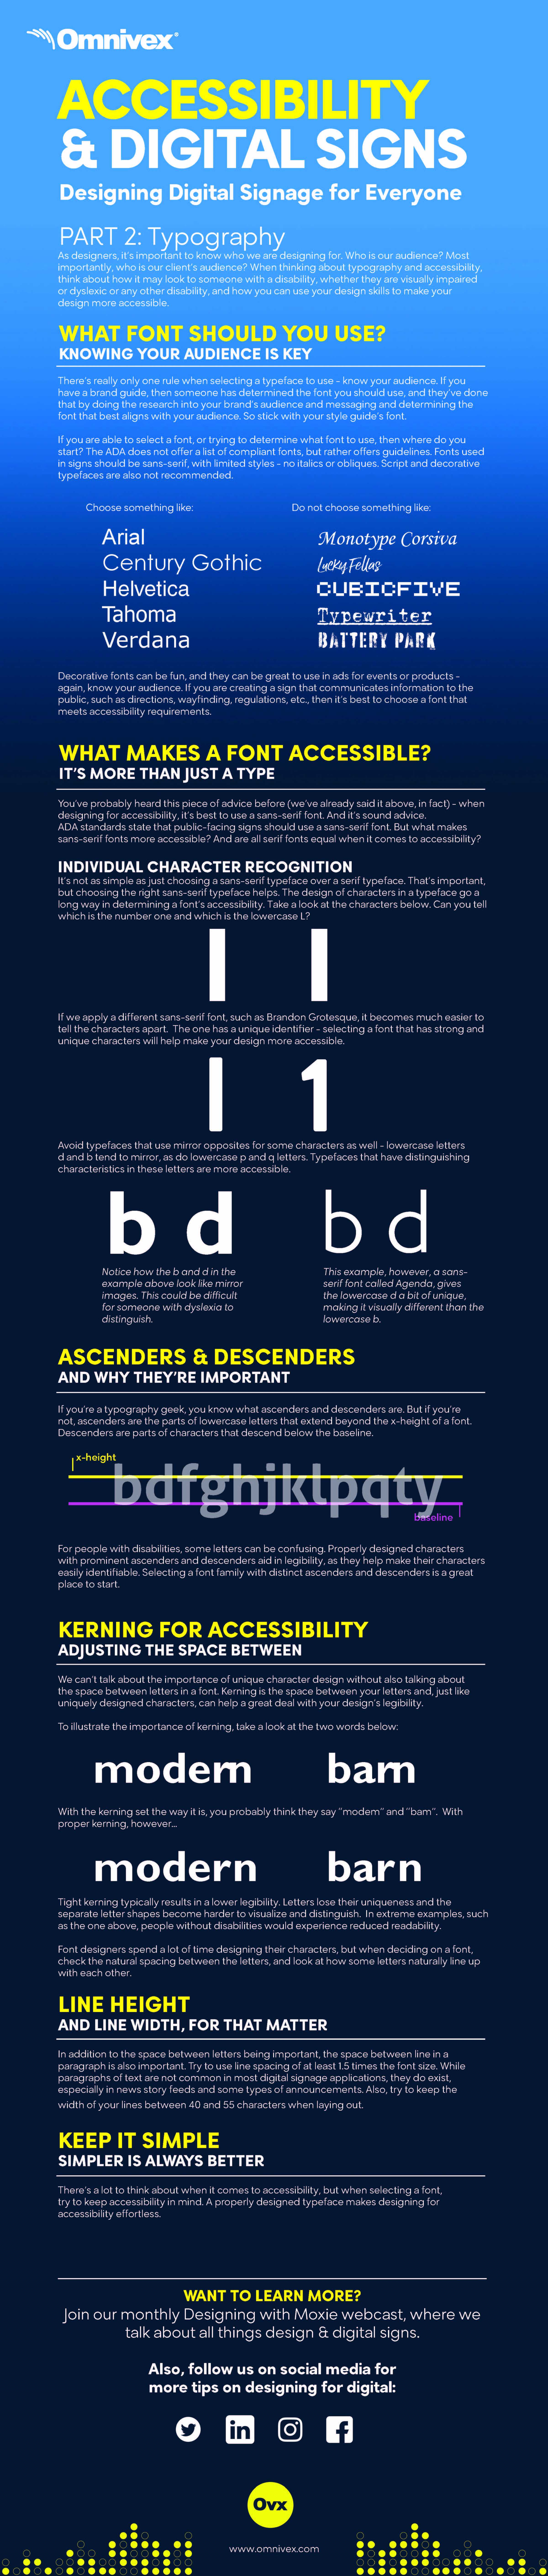 accessibility in design - typography infographic